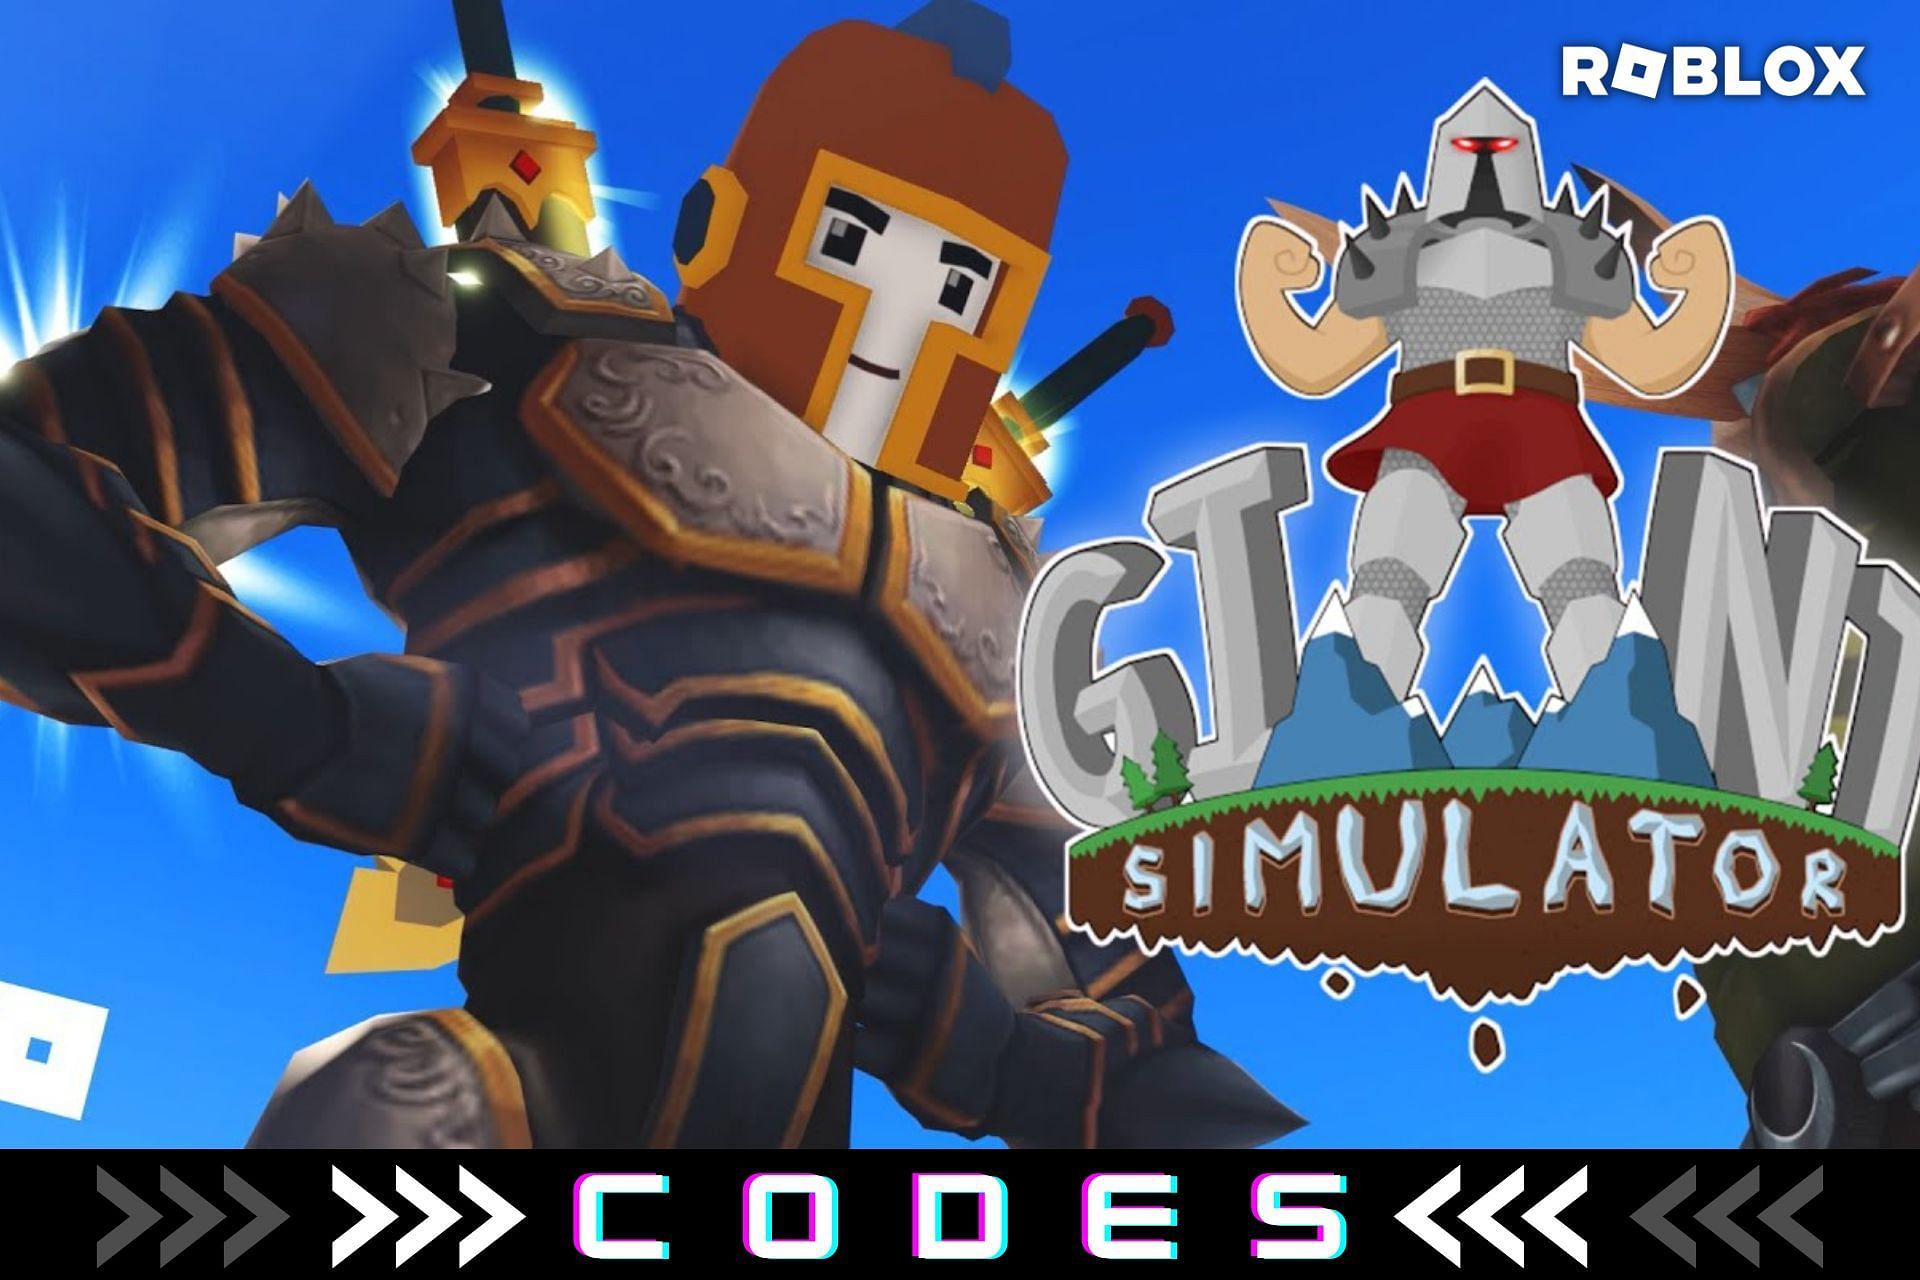 roblox-giant-simulator-codes-for-january-2023-gold-and-free-xp